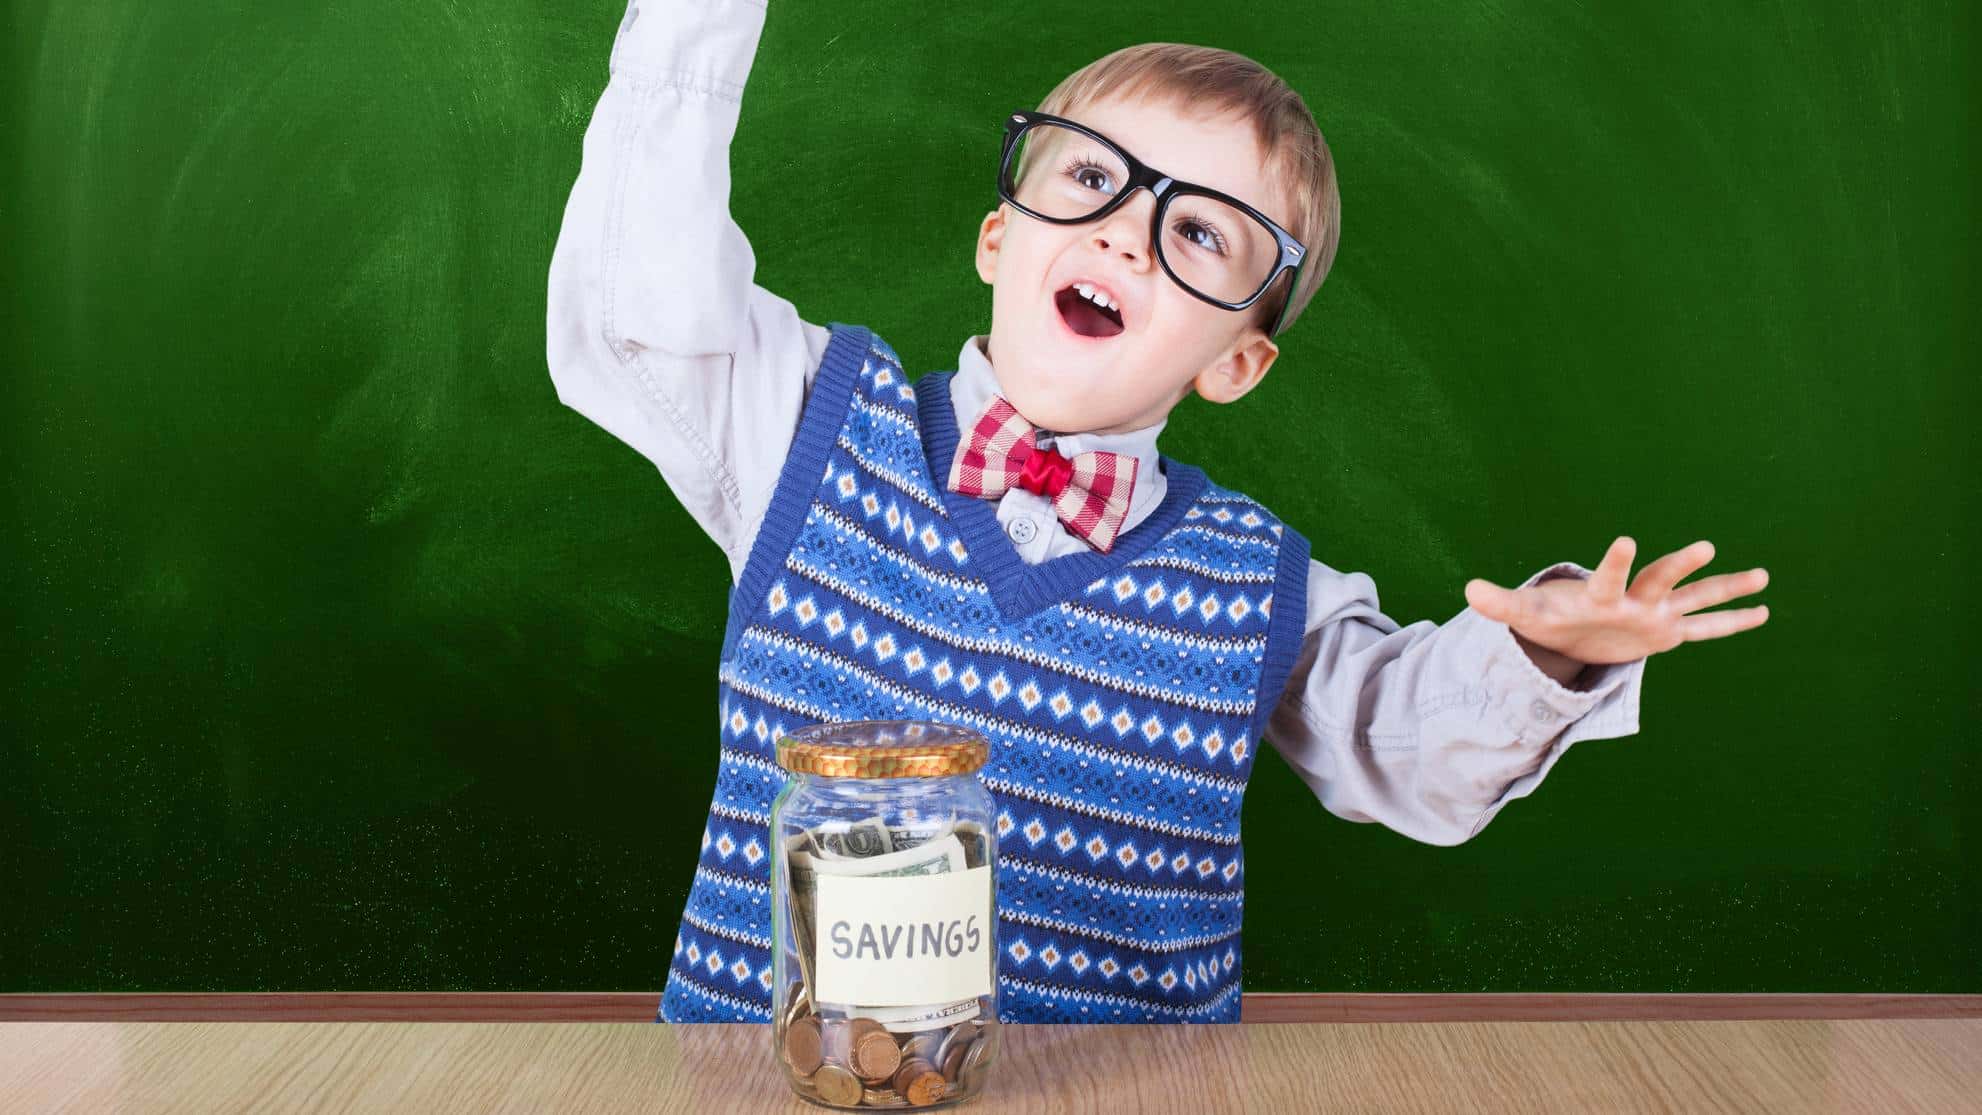 Young ASX share investor excitedly throwing hands up in front of savings jar